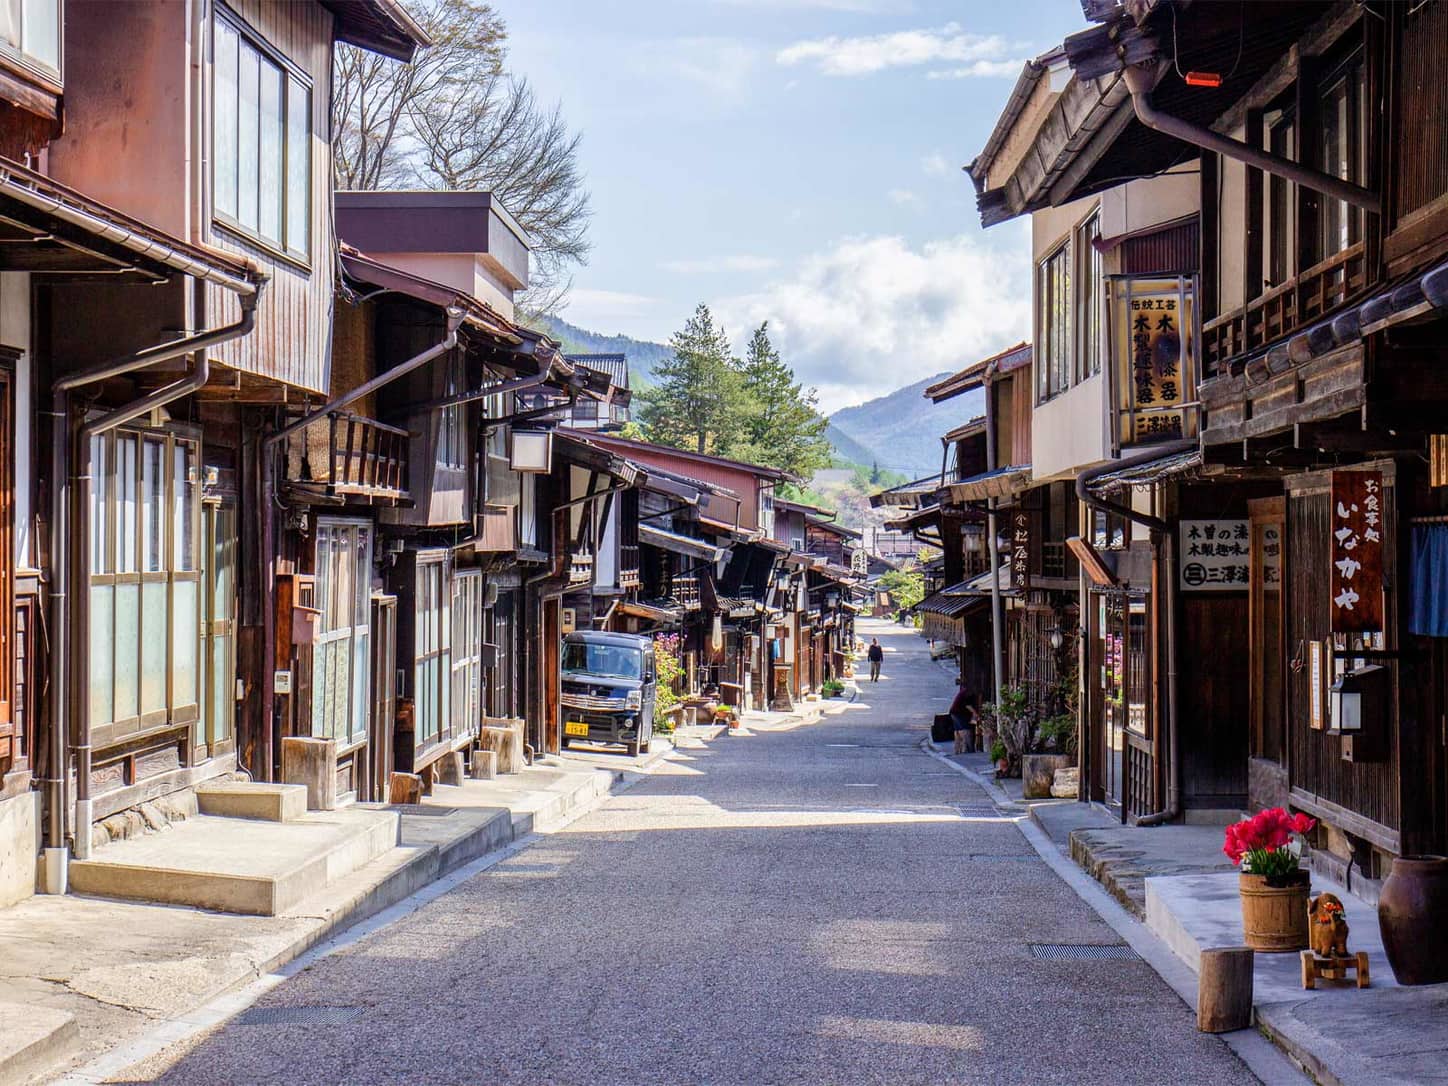 A Walk Through Time: A Guide to Five Days on the Nakasendo Way